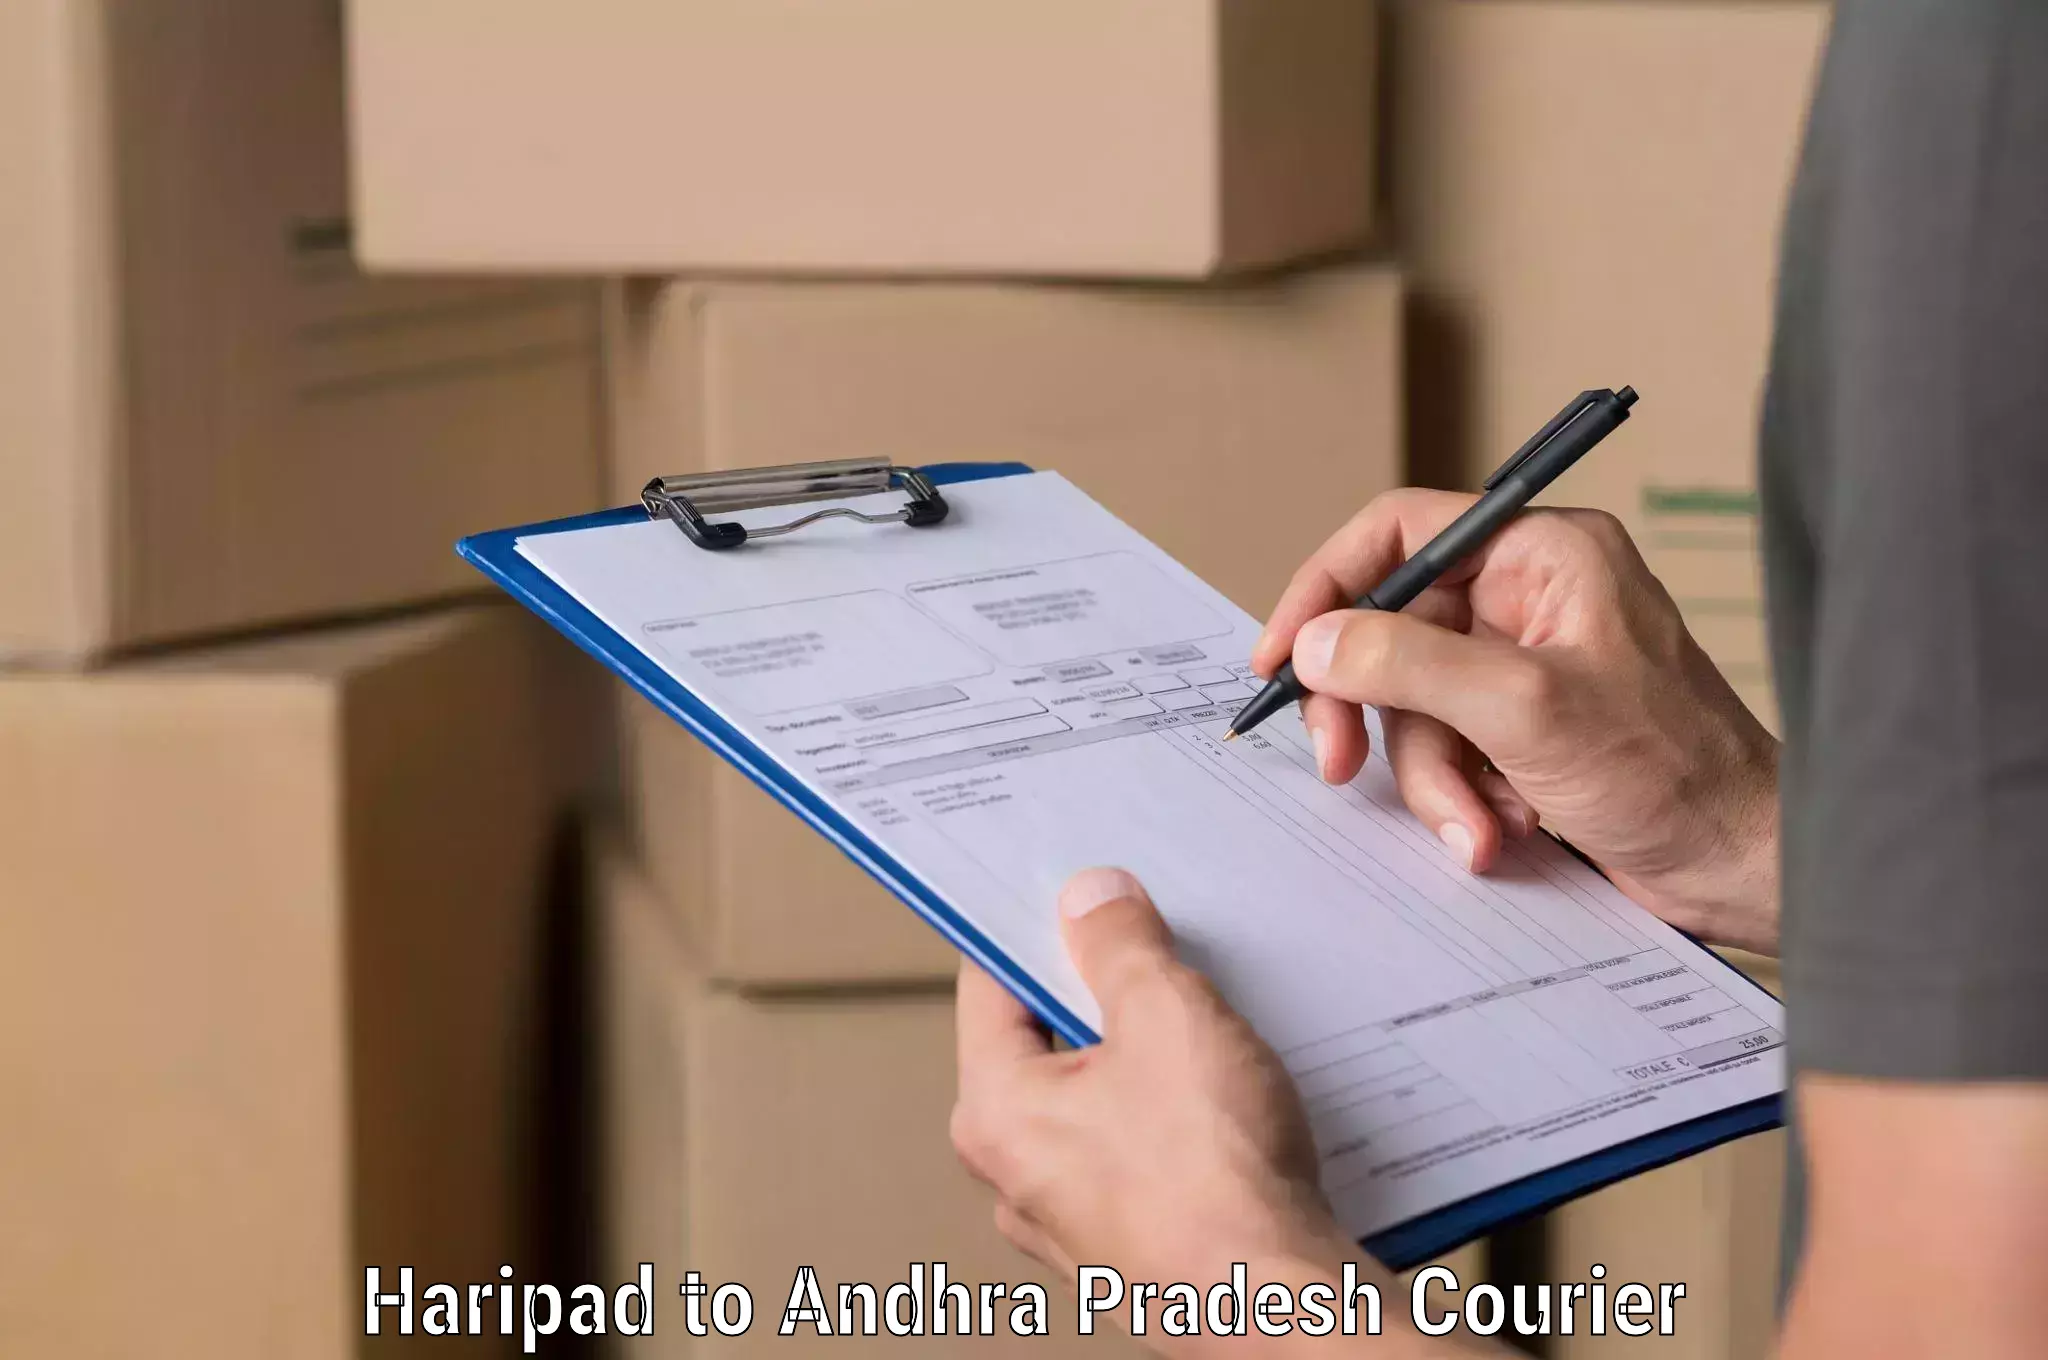 Dynamic courier services Haripad to Visakhapatnam Port